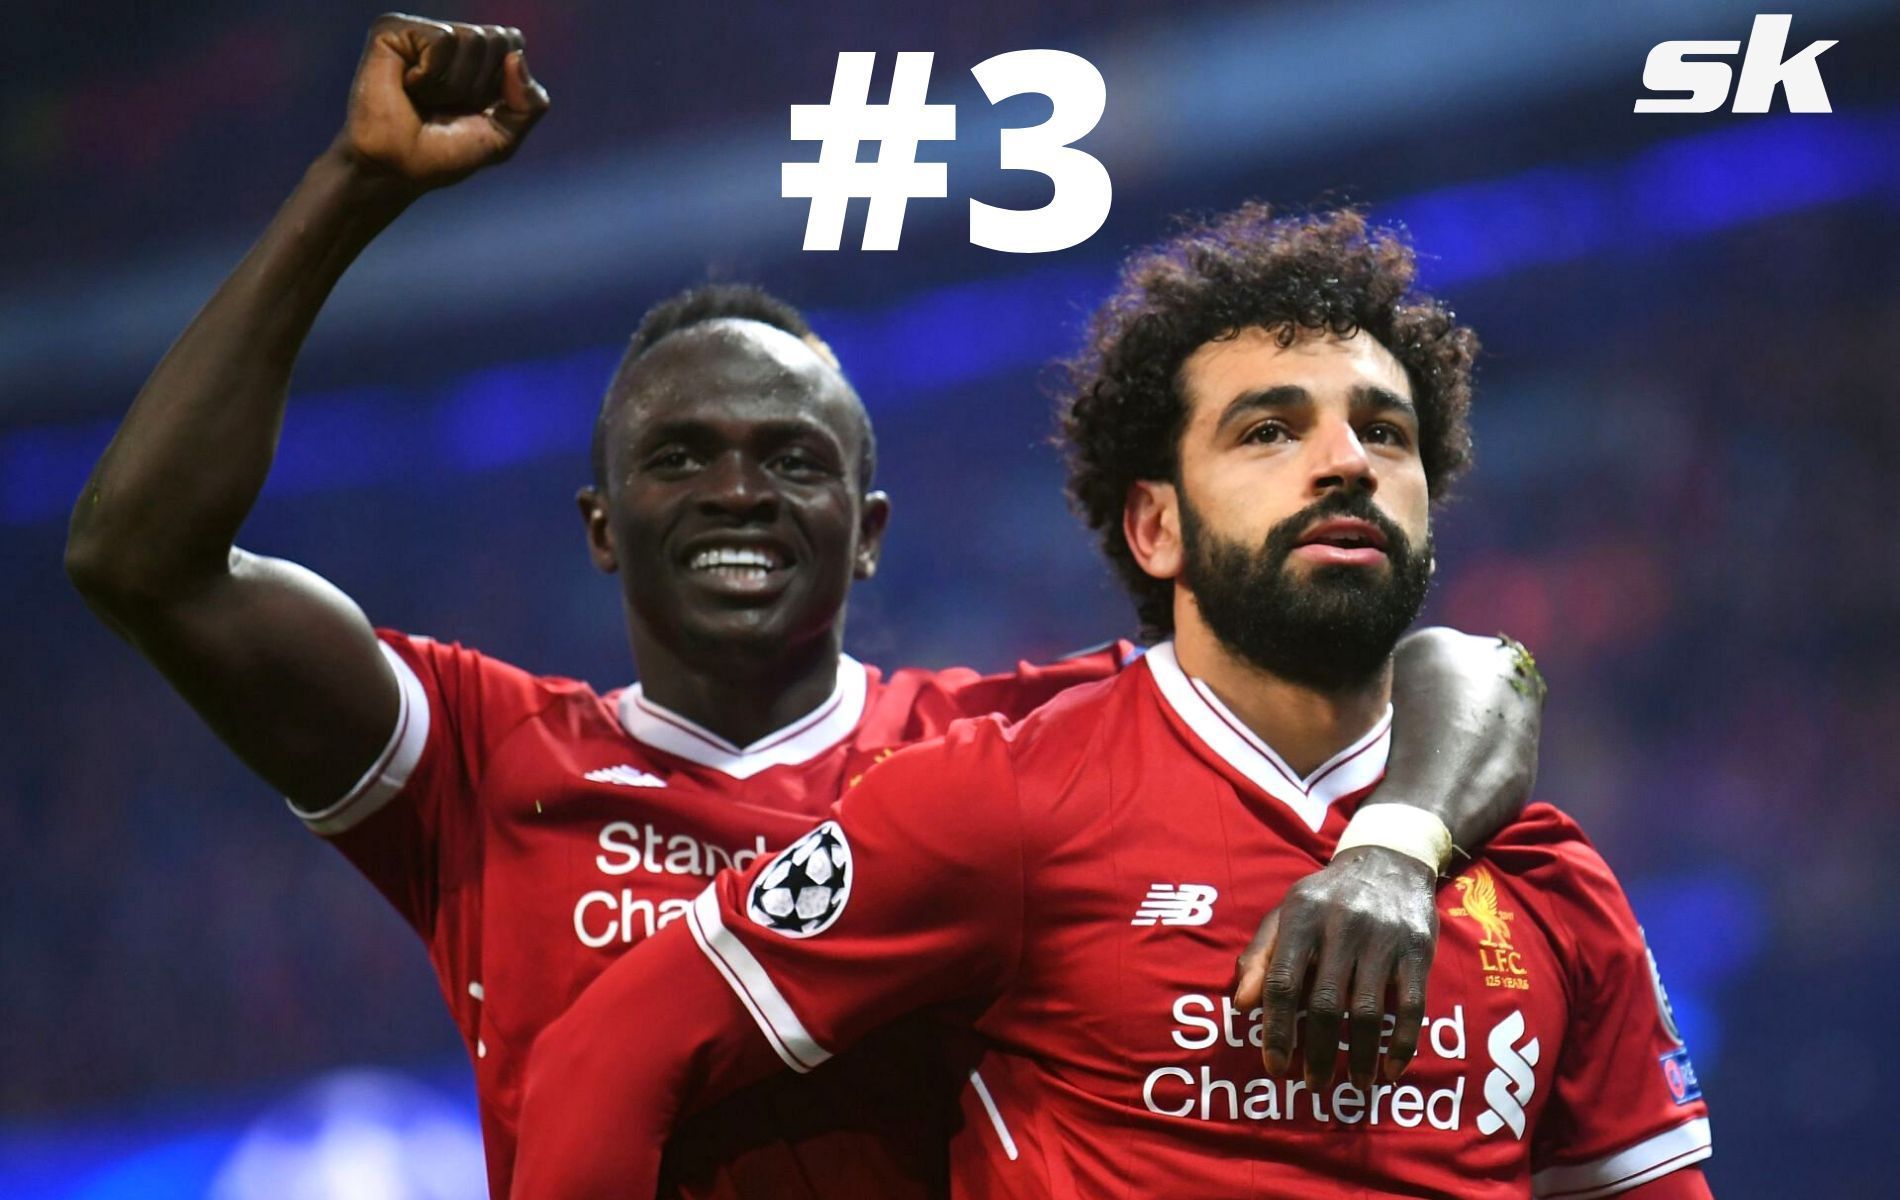 Salah and Mane are third, so who tops the list then?